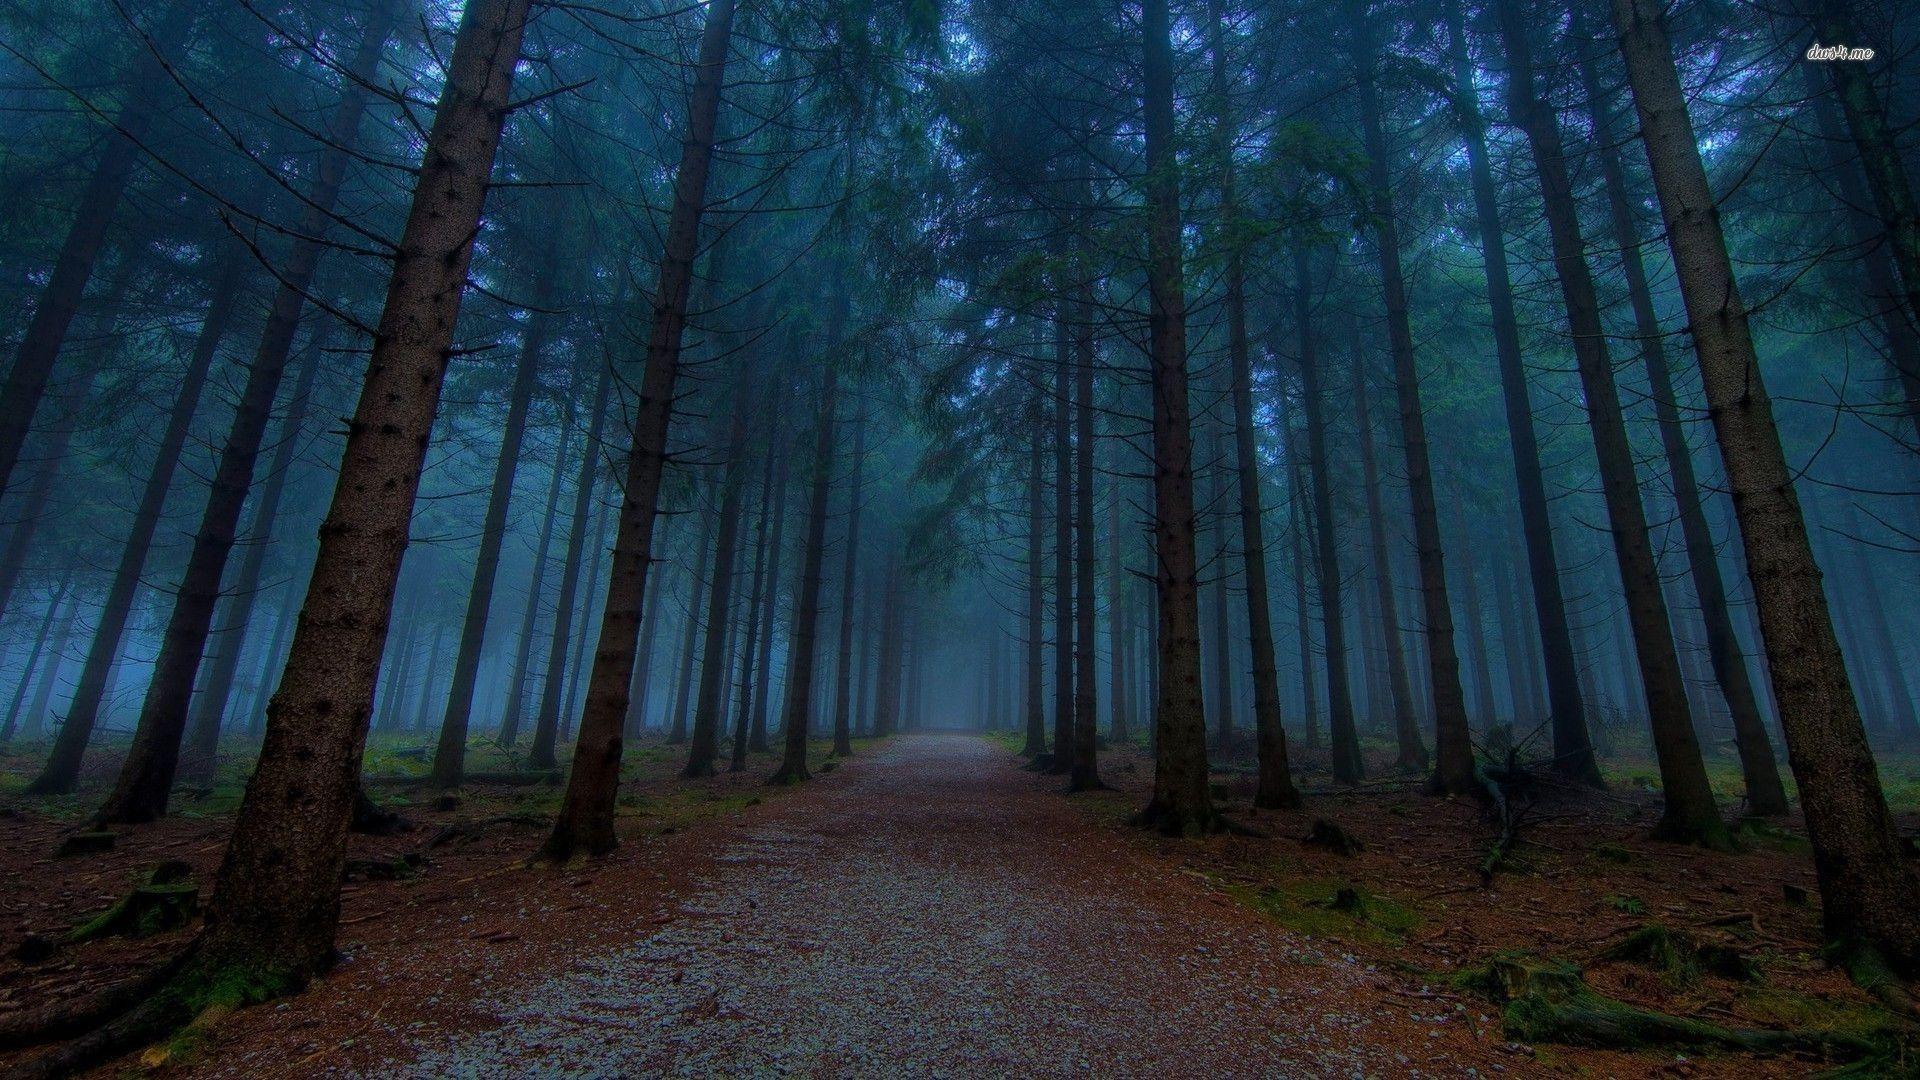 Forests: Road Forest Path Foggy Trees Dark Forests Nature Wallpaper